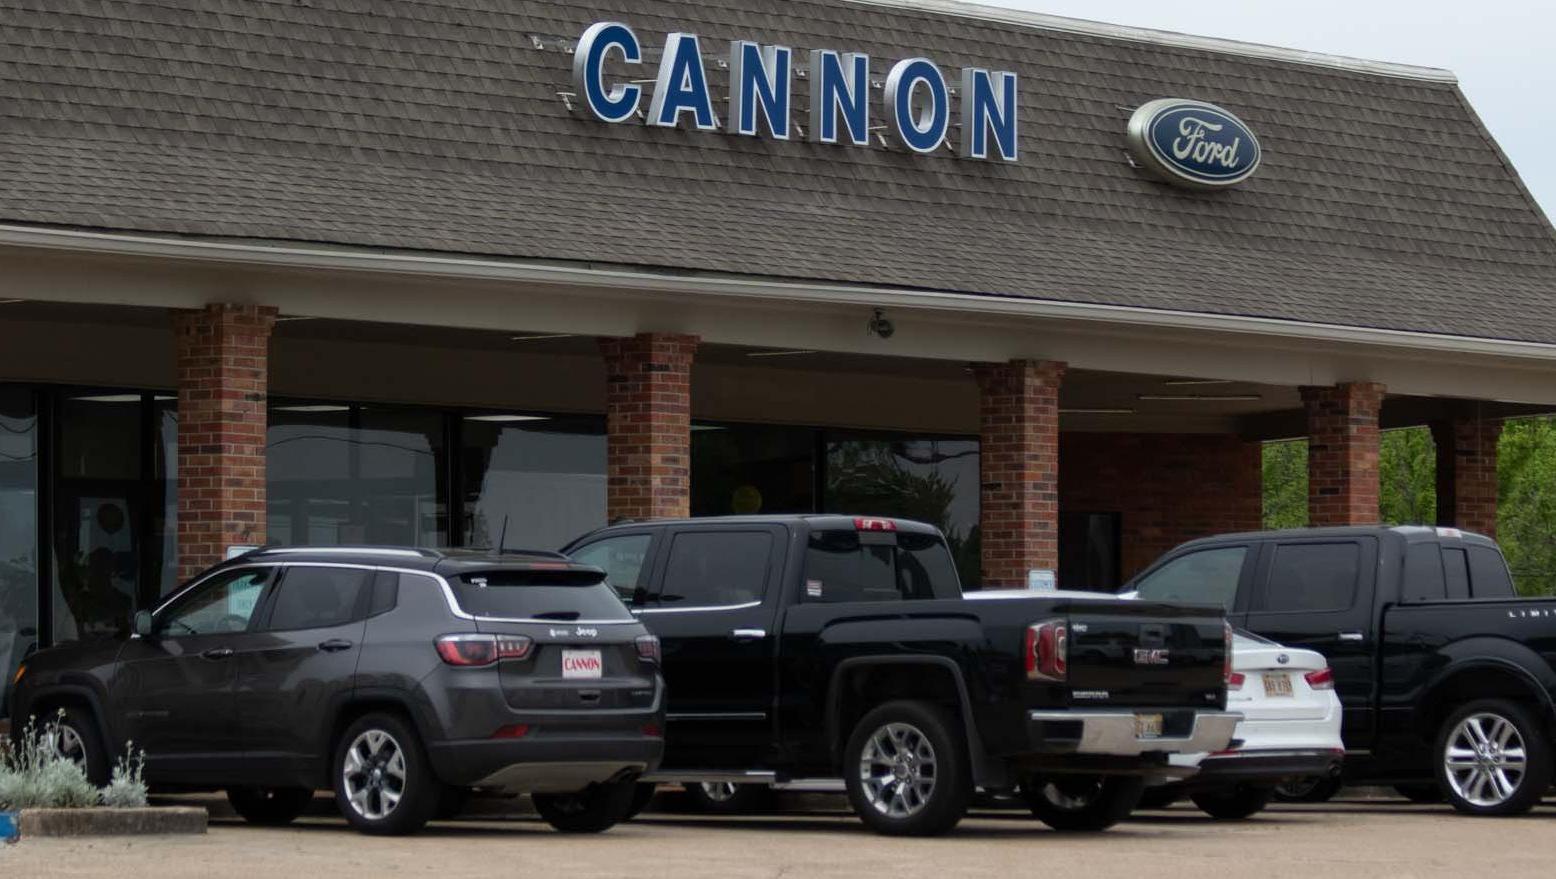 Cannon Ford of Starkville